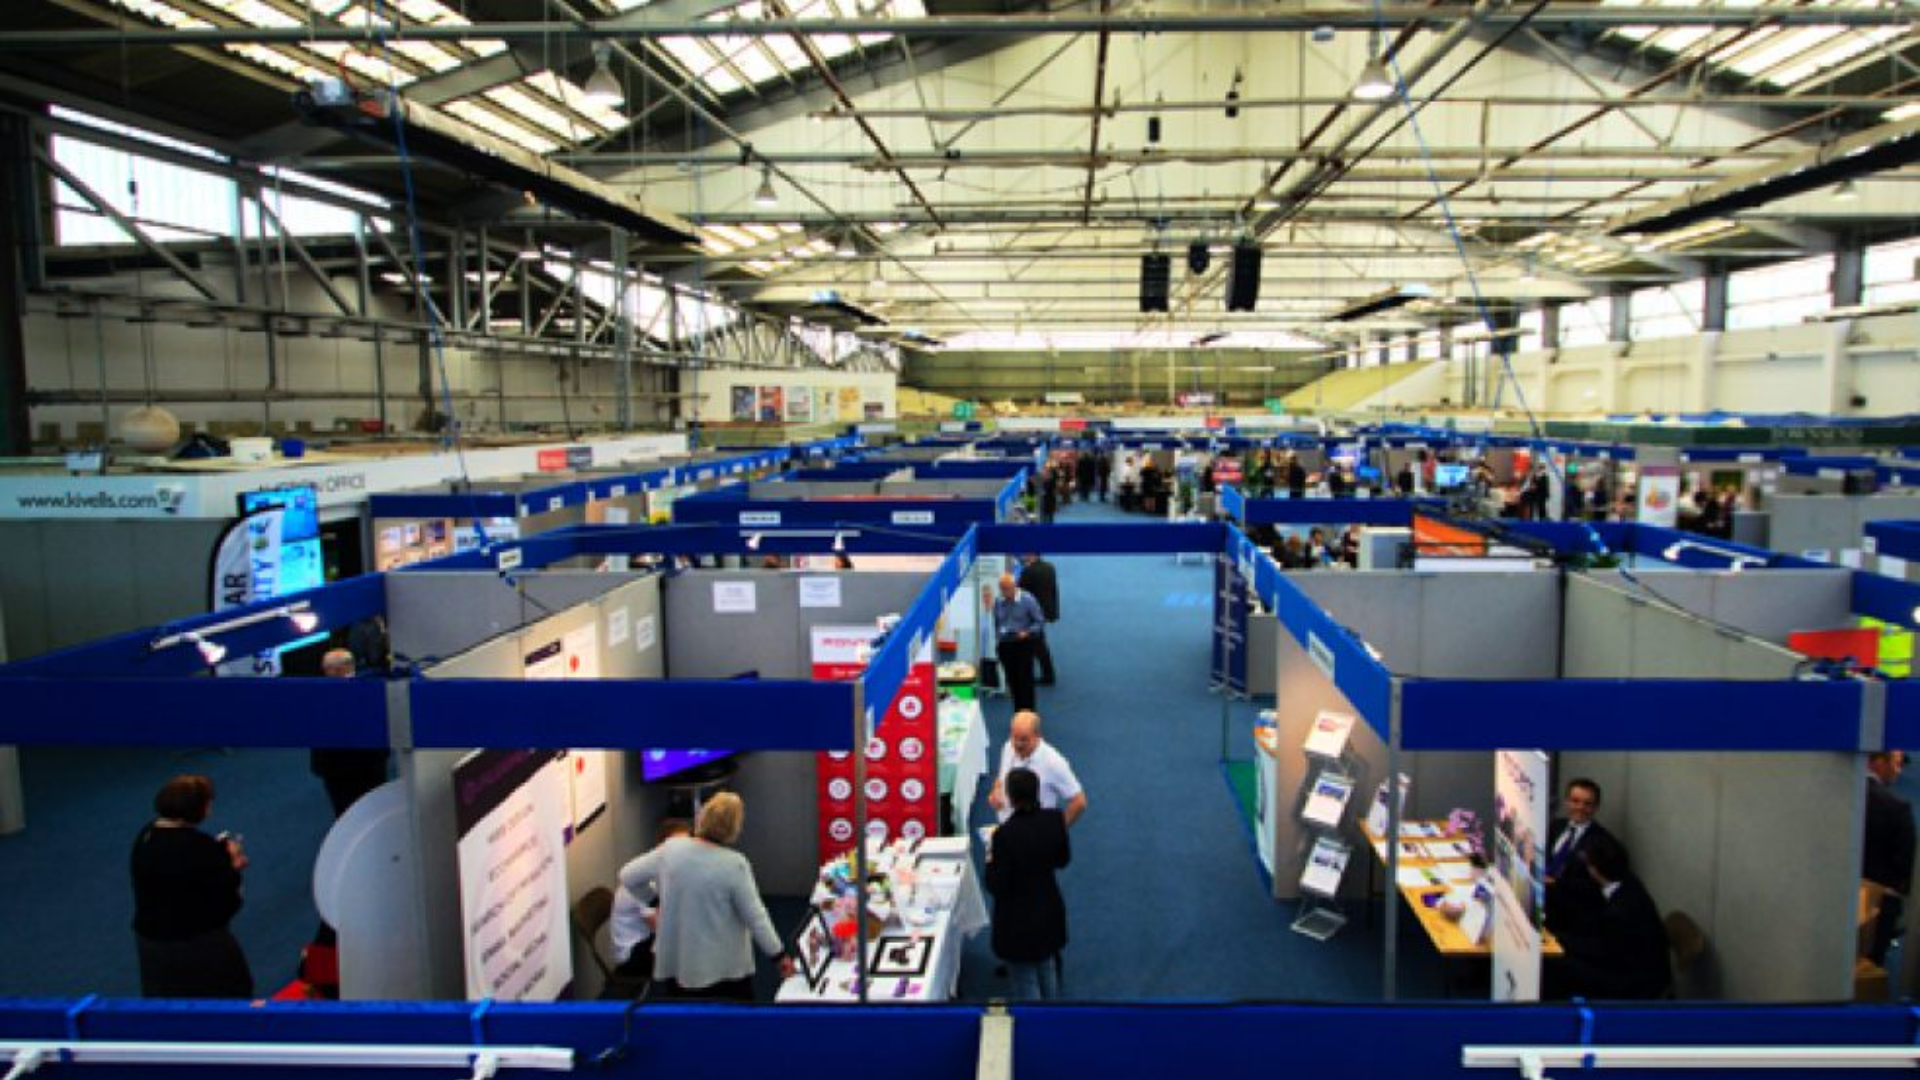 South West Business Expo 2016